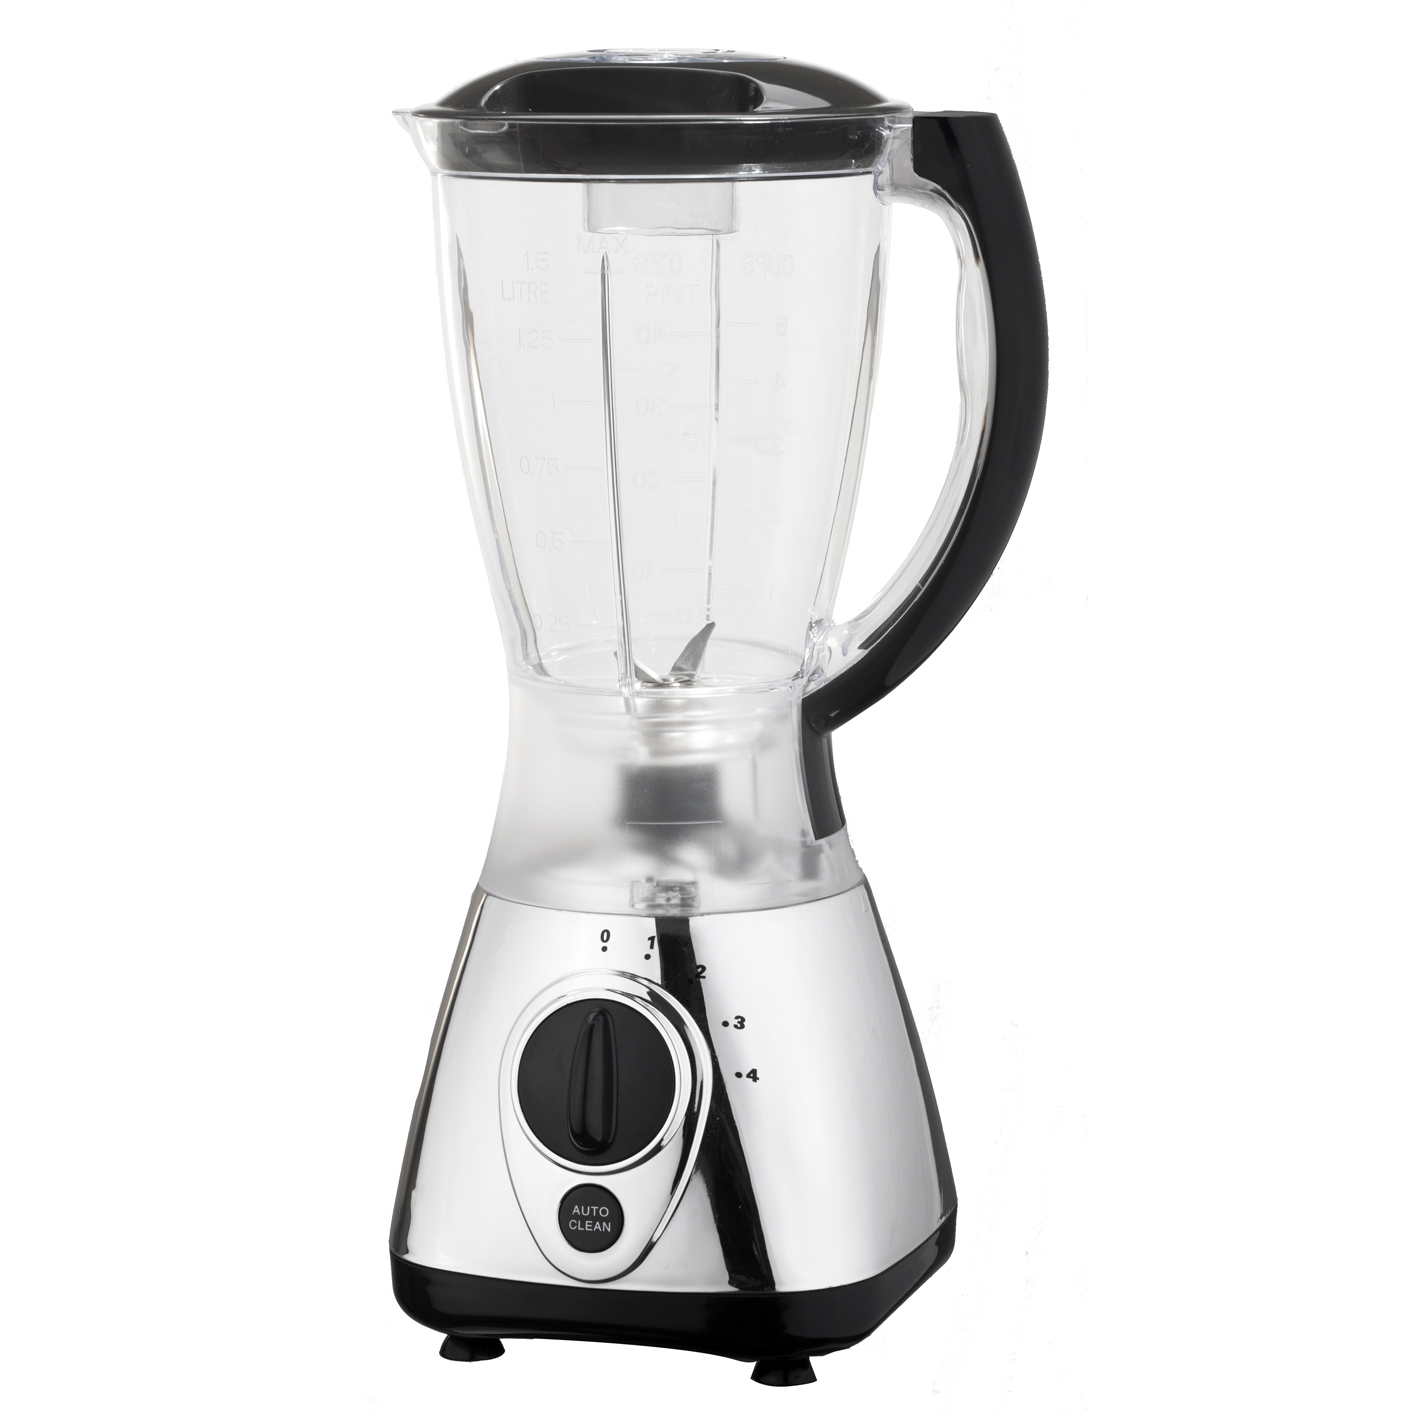 Table blender with 4 speeds with pulse feature